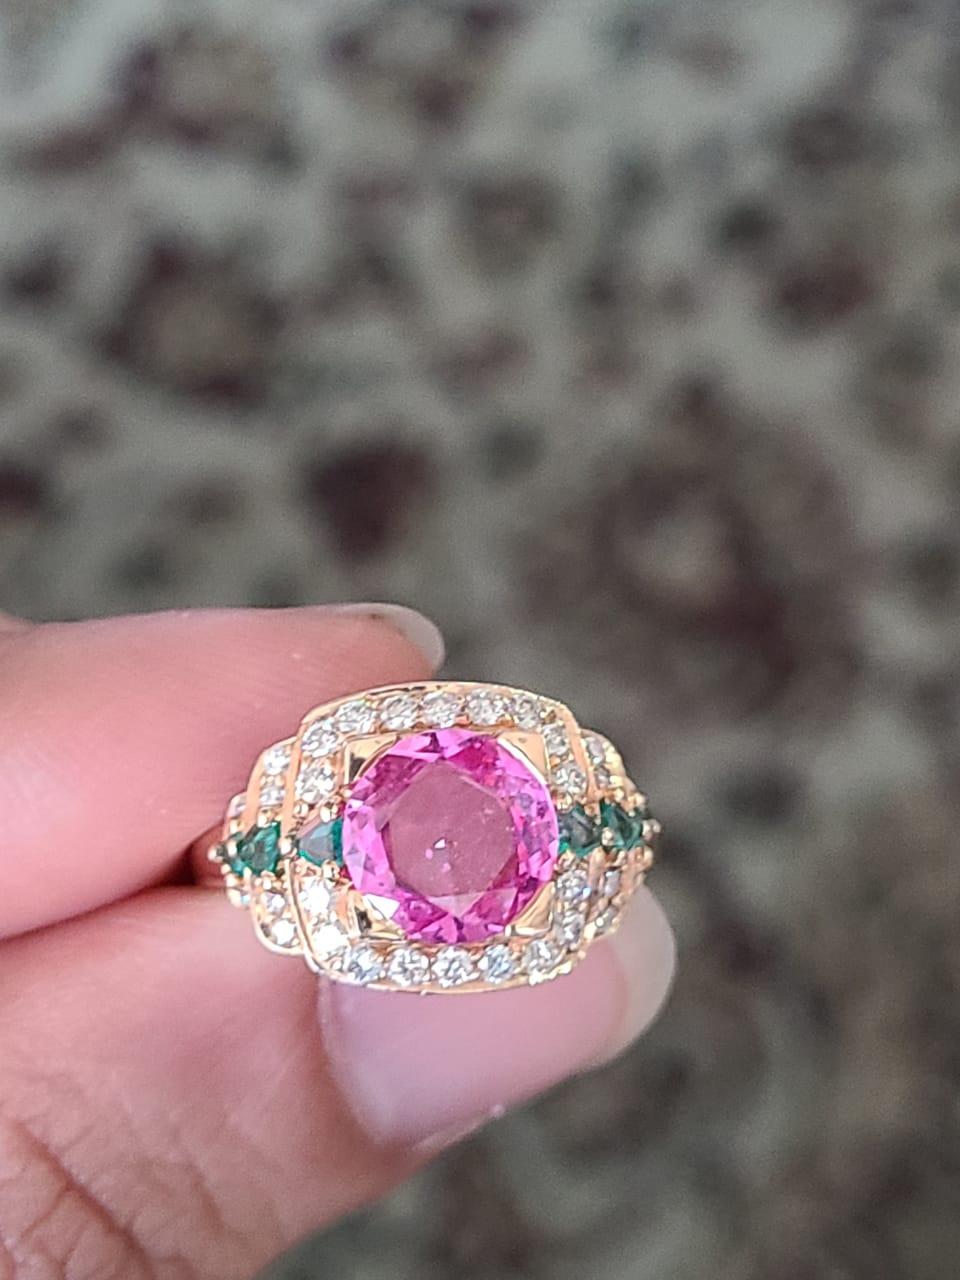 A very beautiful and dainty Pink Sapphire & Emerald Cocktail Ring set in 18K Gold and Diamonds. The weight of the Pink Sapphire is 2.19 carats. The Pink Sapphire is of Madagascar origin. The weight of the Emeralds is 0.28 carats. The weight of the